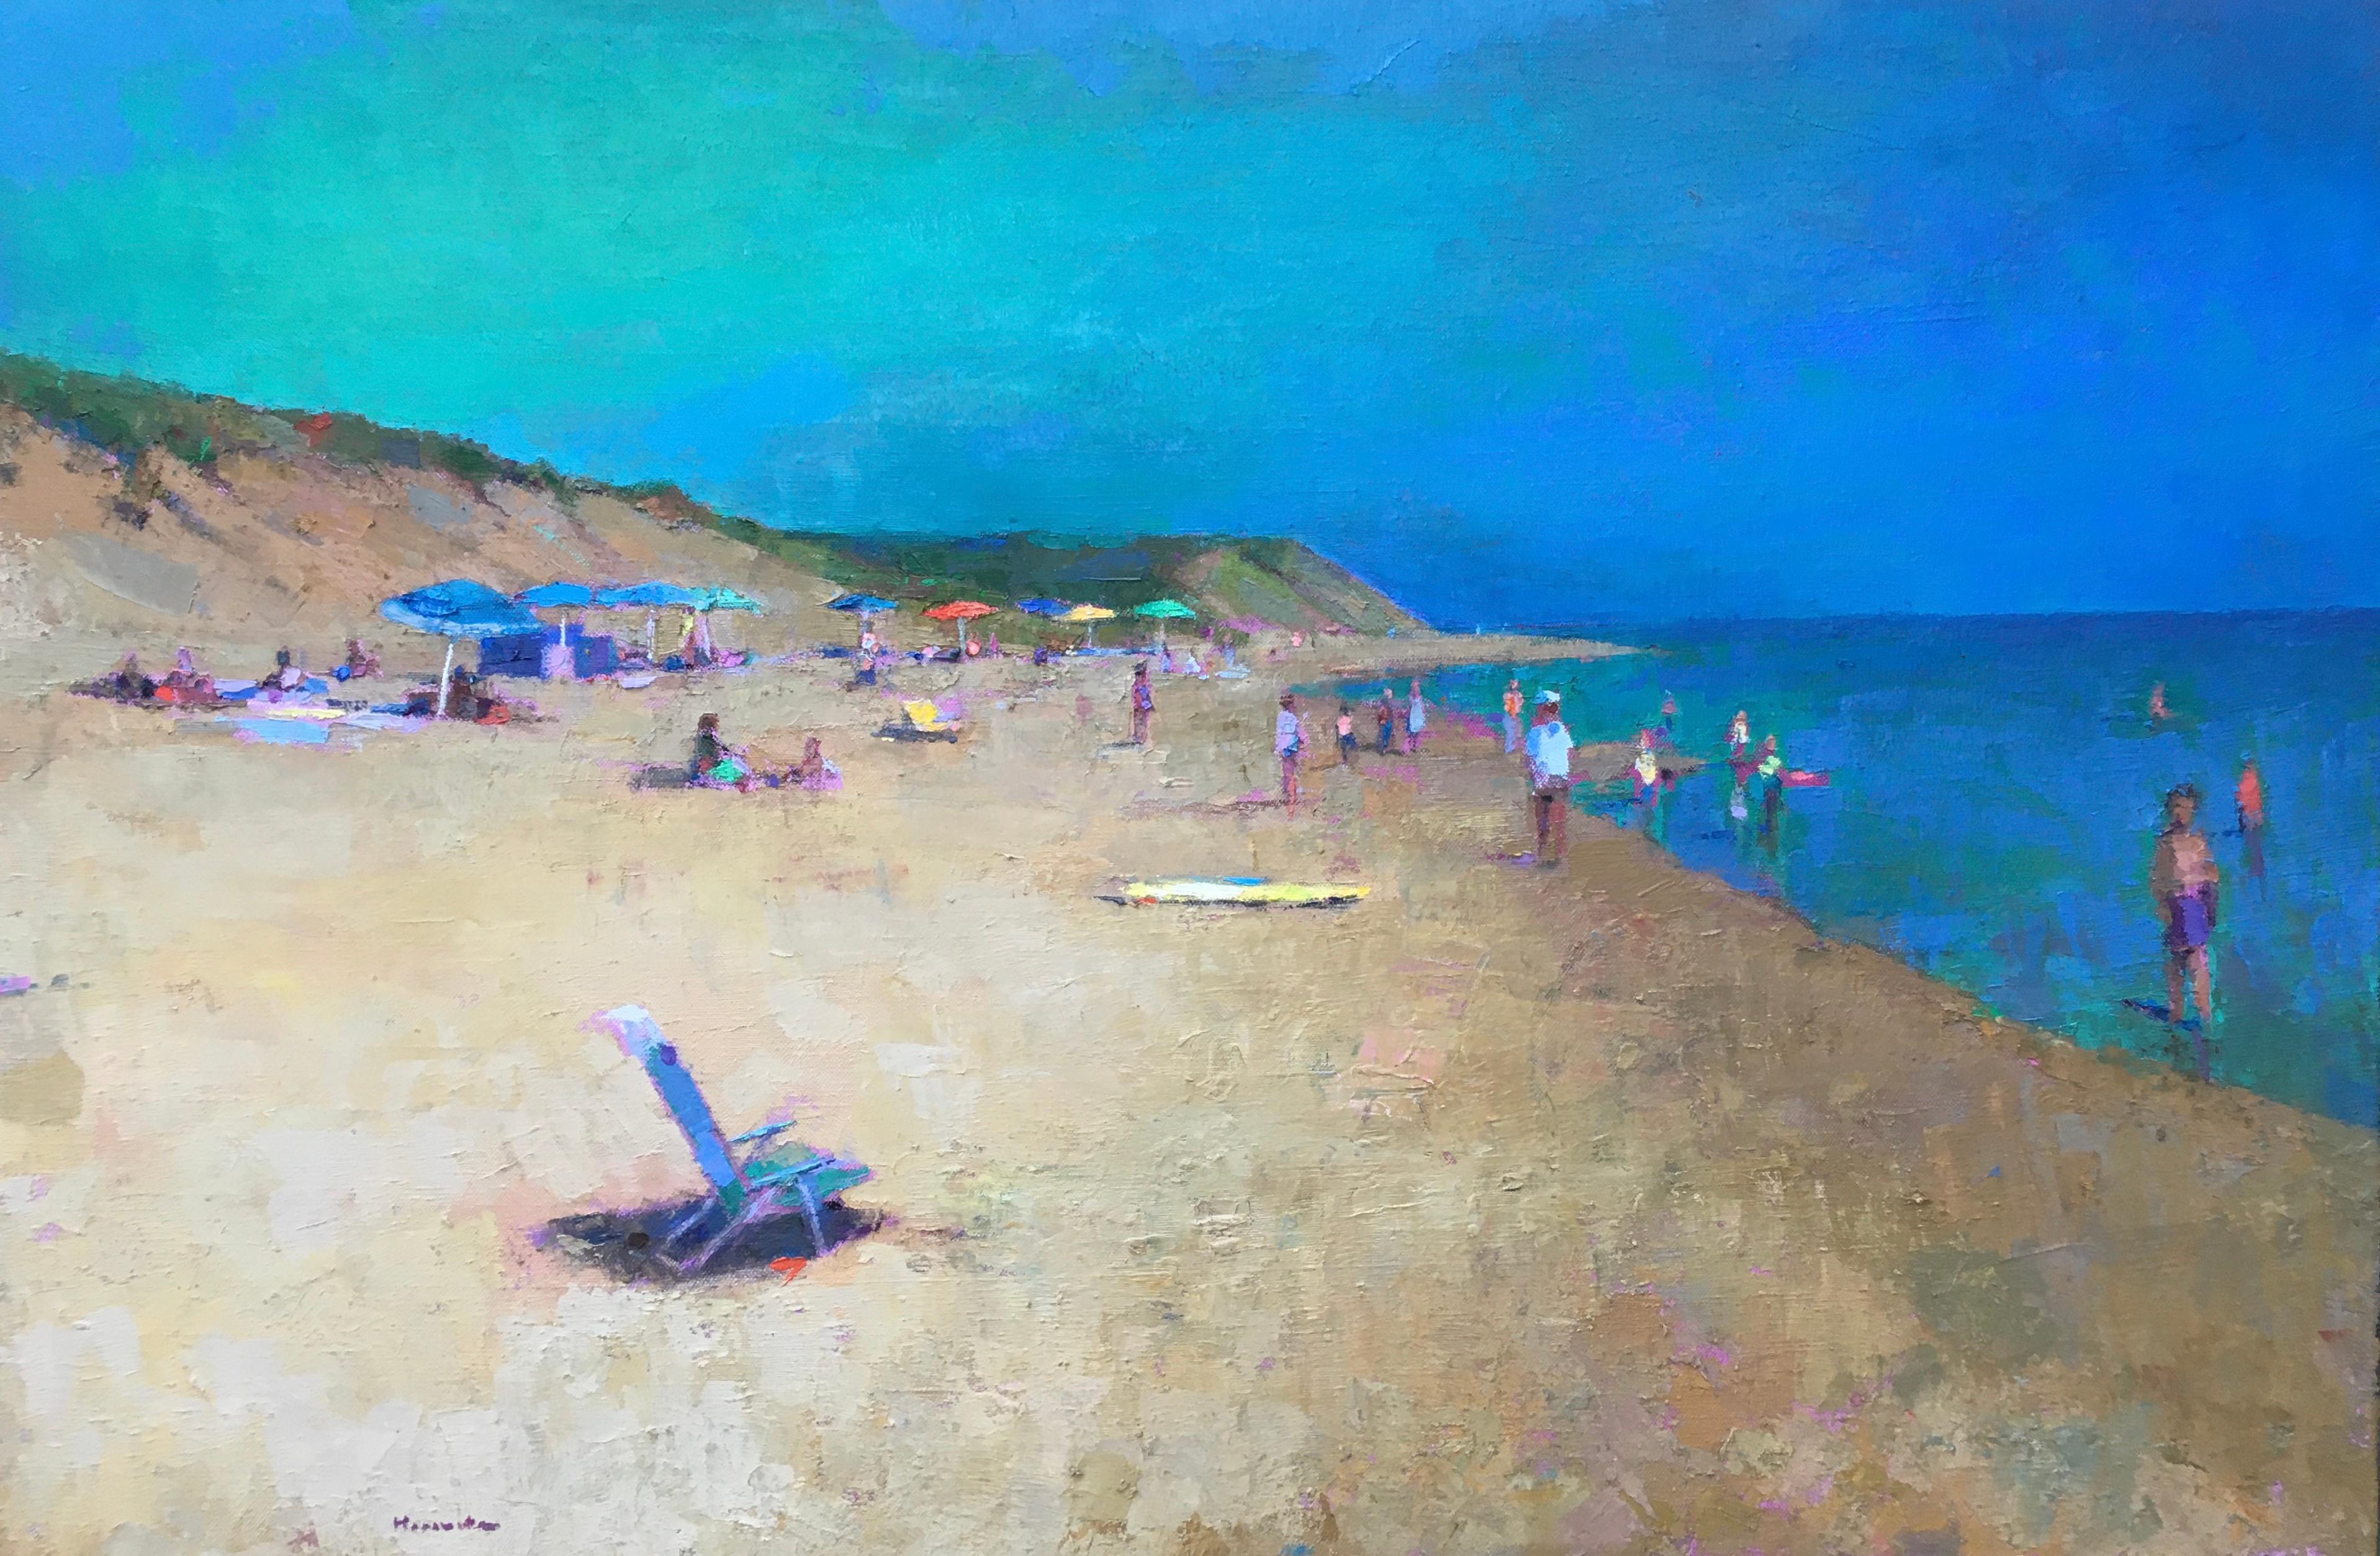 Larry Horowitz Landscape Painting - "Beach Summer" Oil painting of a beach scene with people, umbrellas, and cliffs